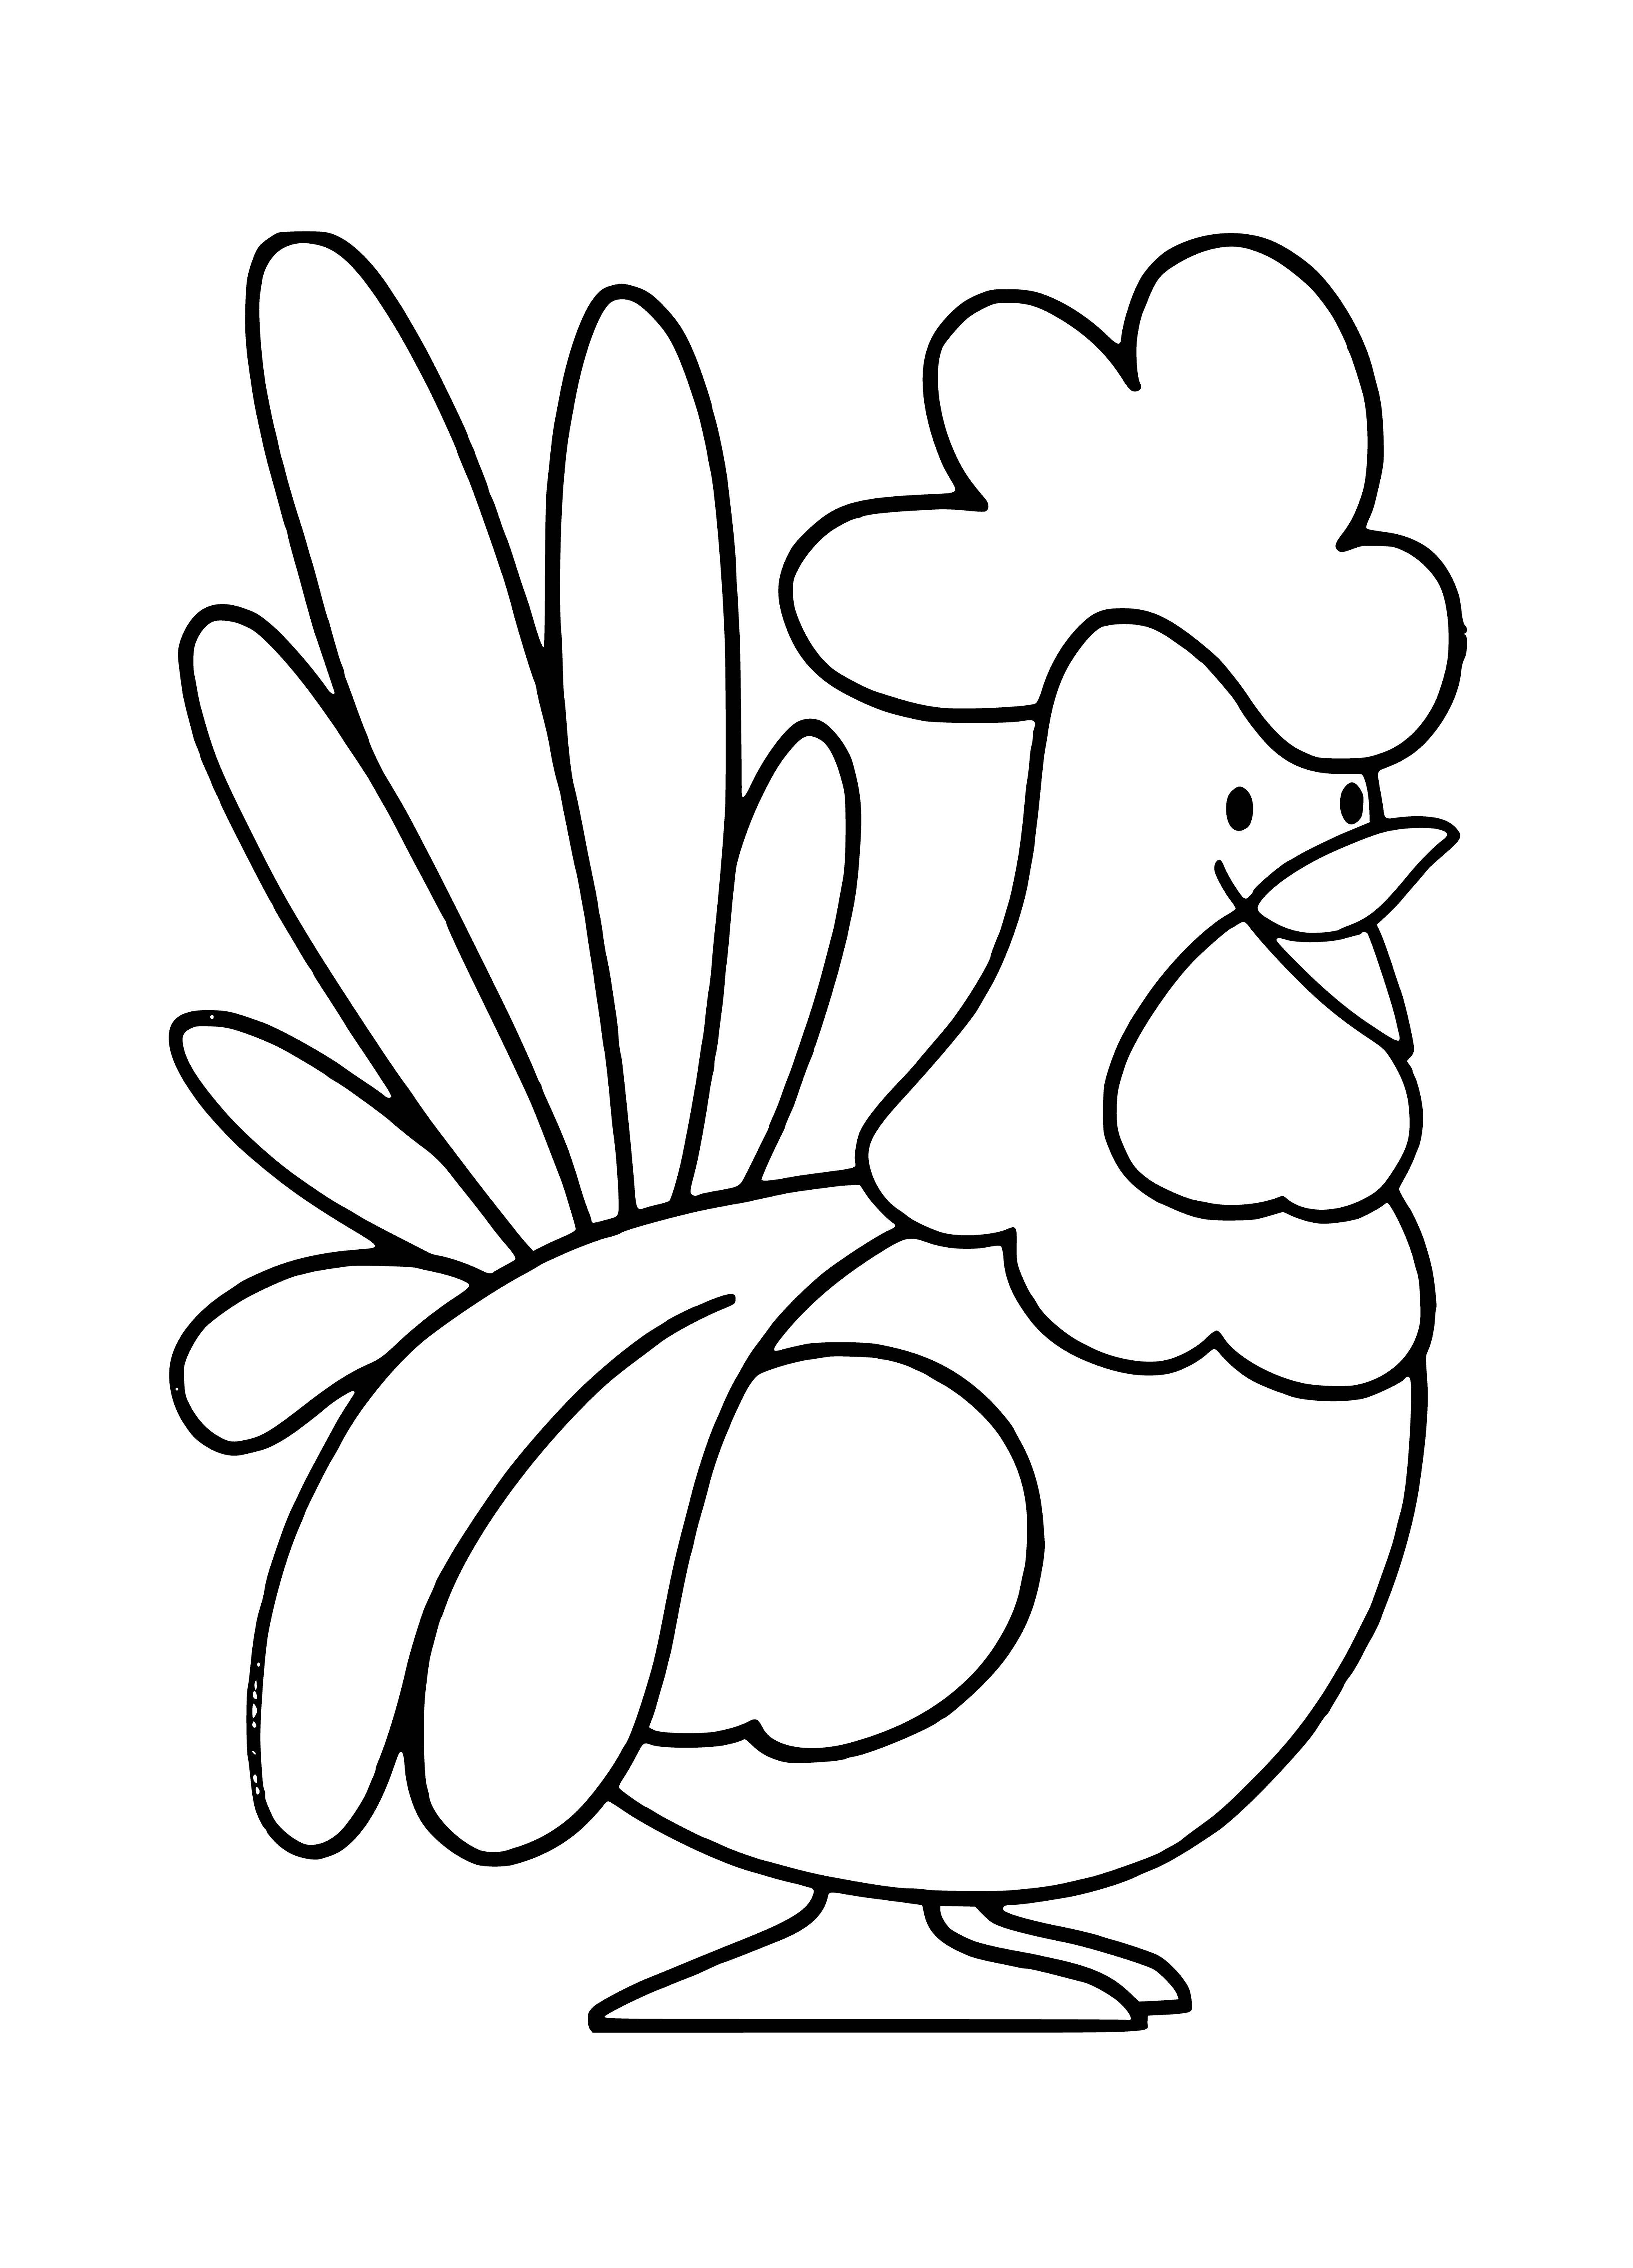 Rooster toy coloring page